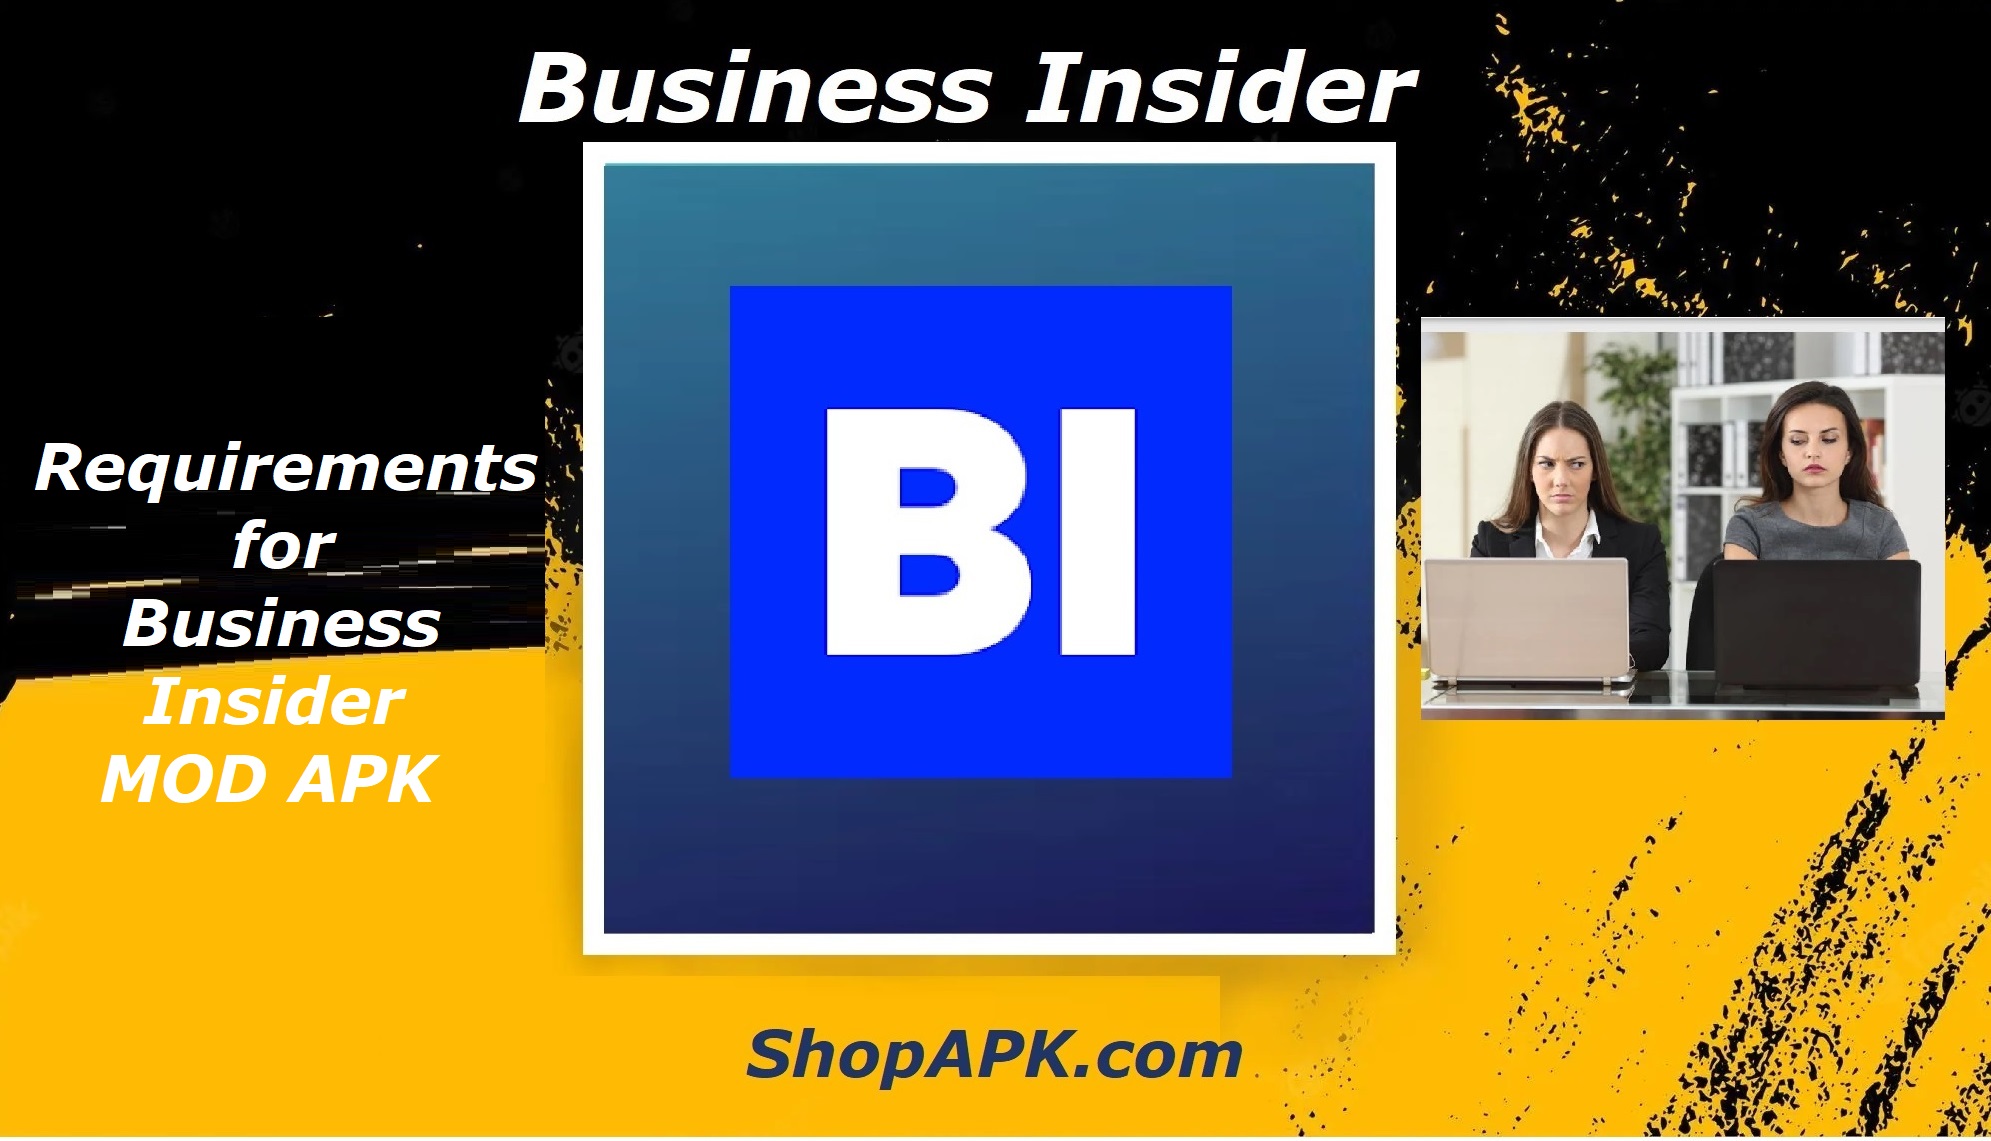 Requirements for Business Insider MOD APK